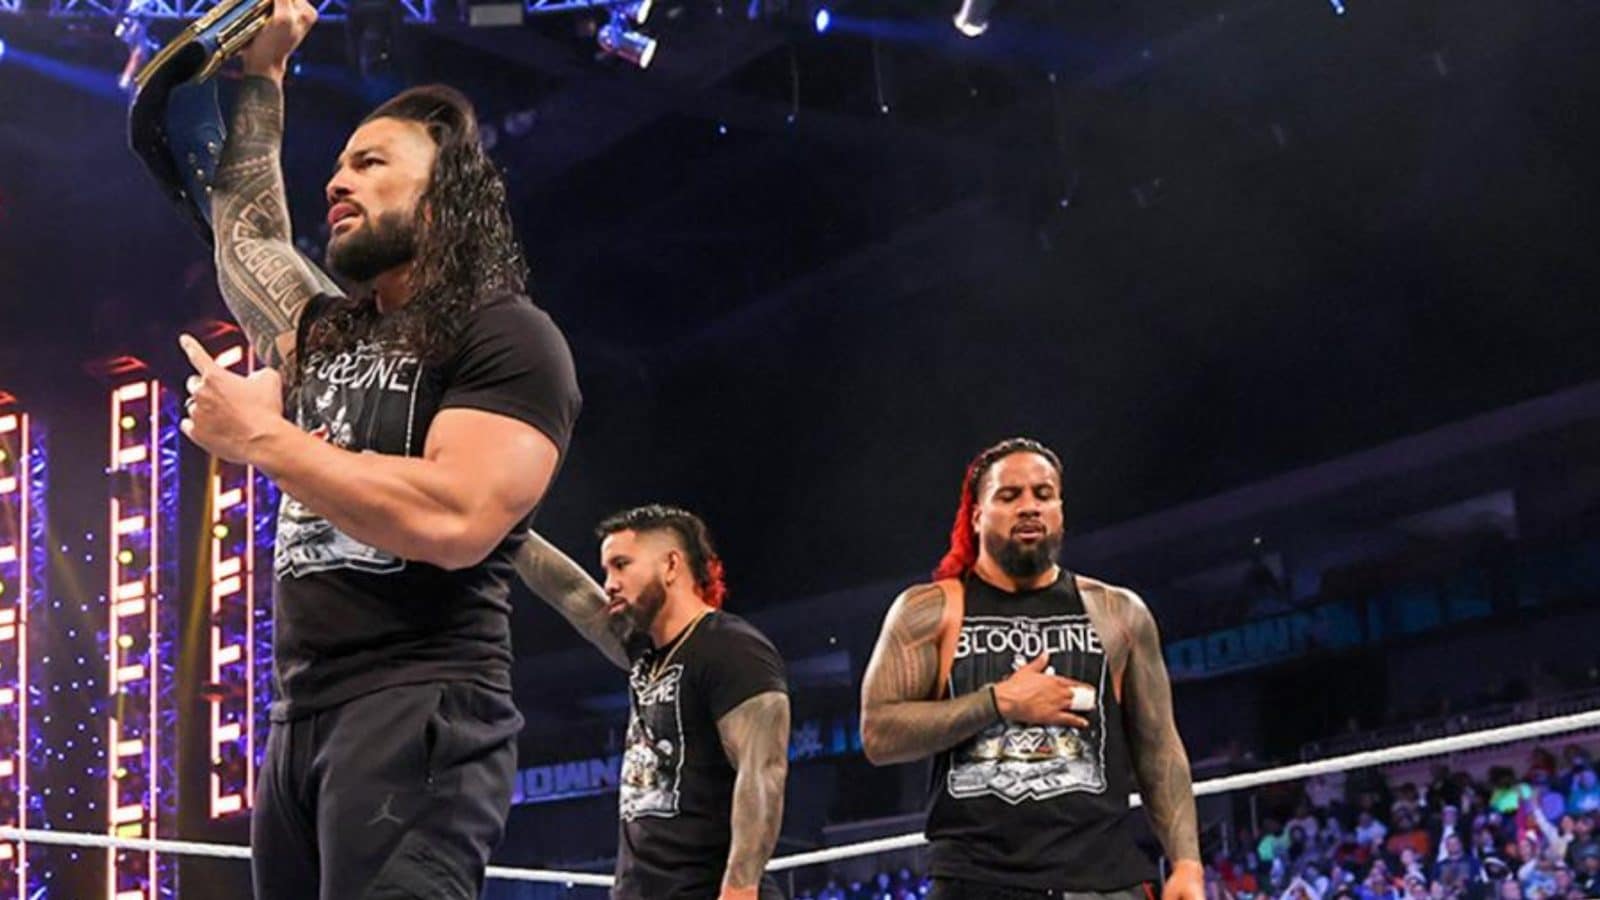 Wwe Smackdown Results Shayna Baszler Faces Naomi Roman Reigns Leads The Bloodline Against King Woods And Sir Kofi